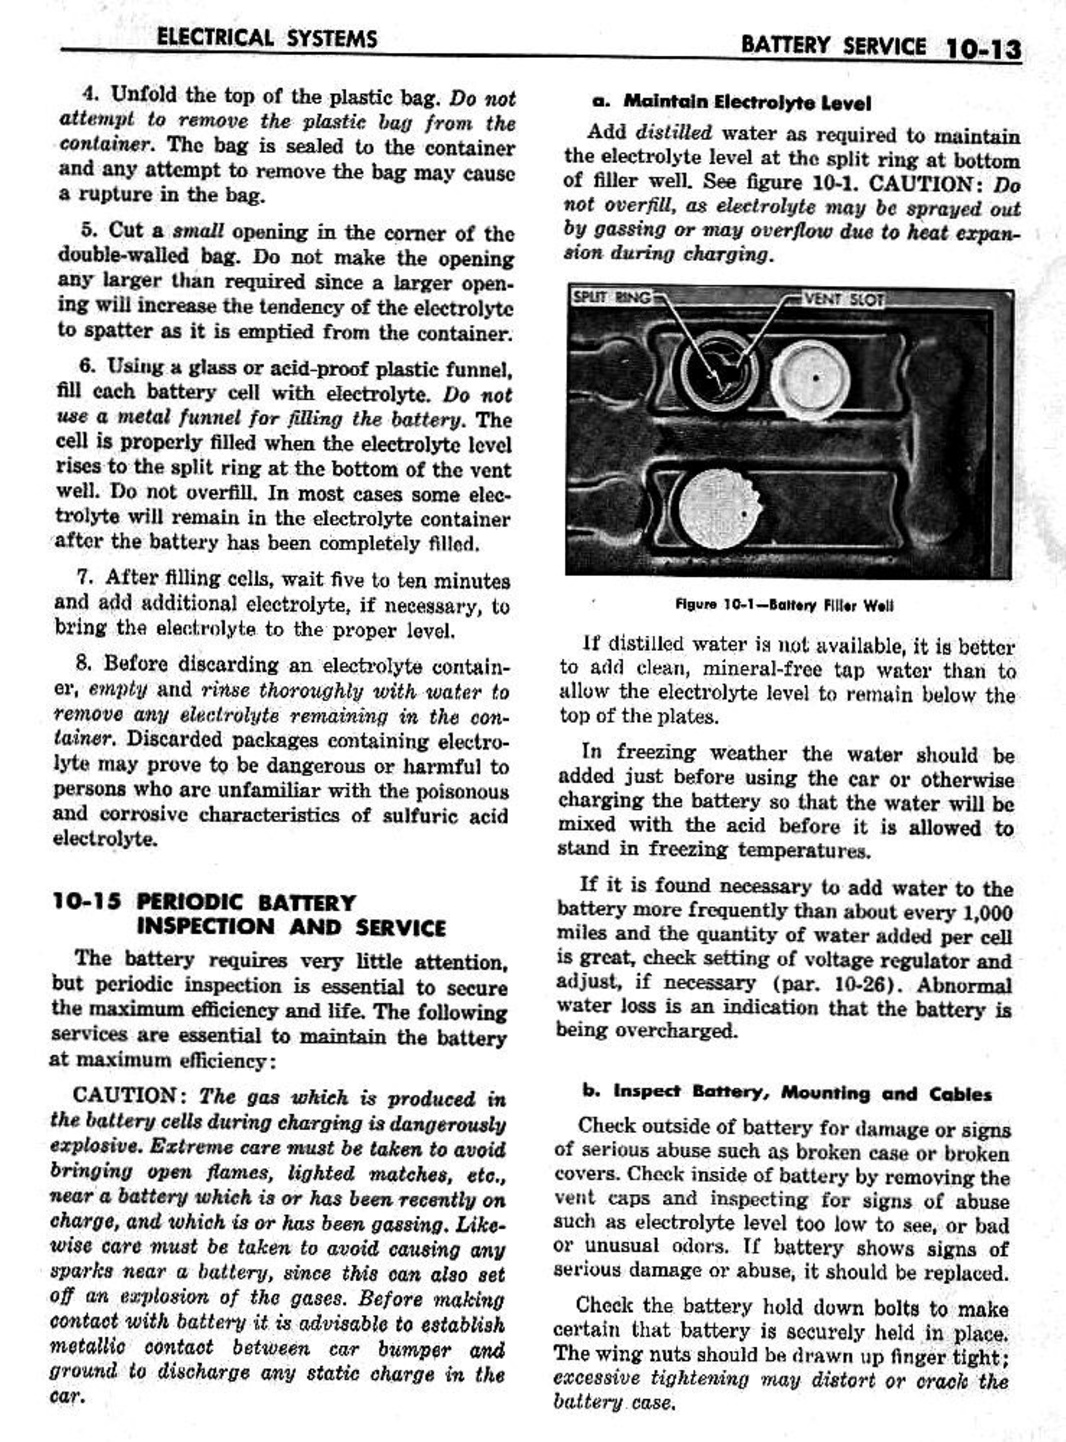 n_11 1959 Buick Shop Manual - Electrical Systems-013-013.jpg